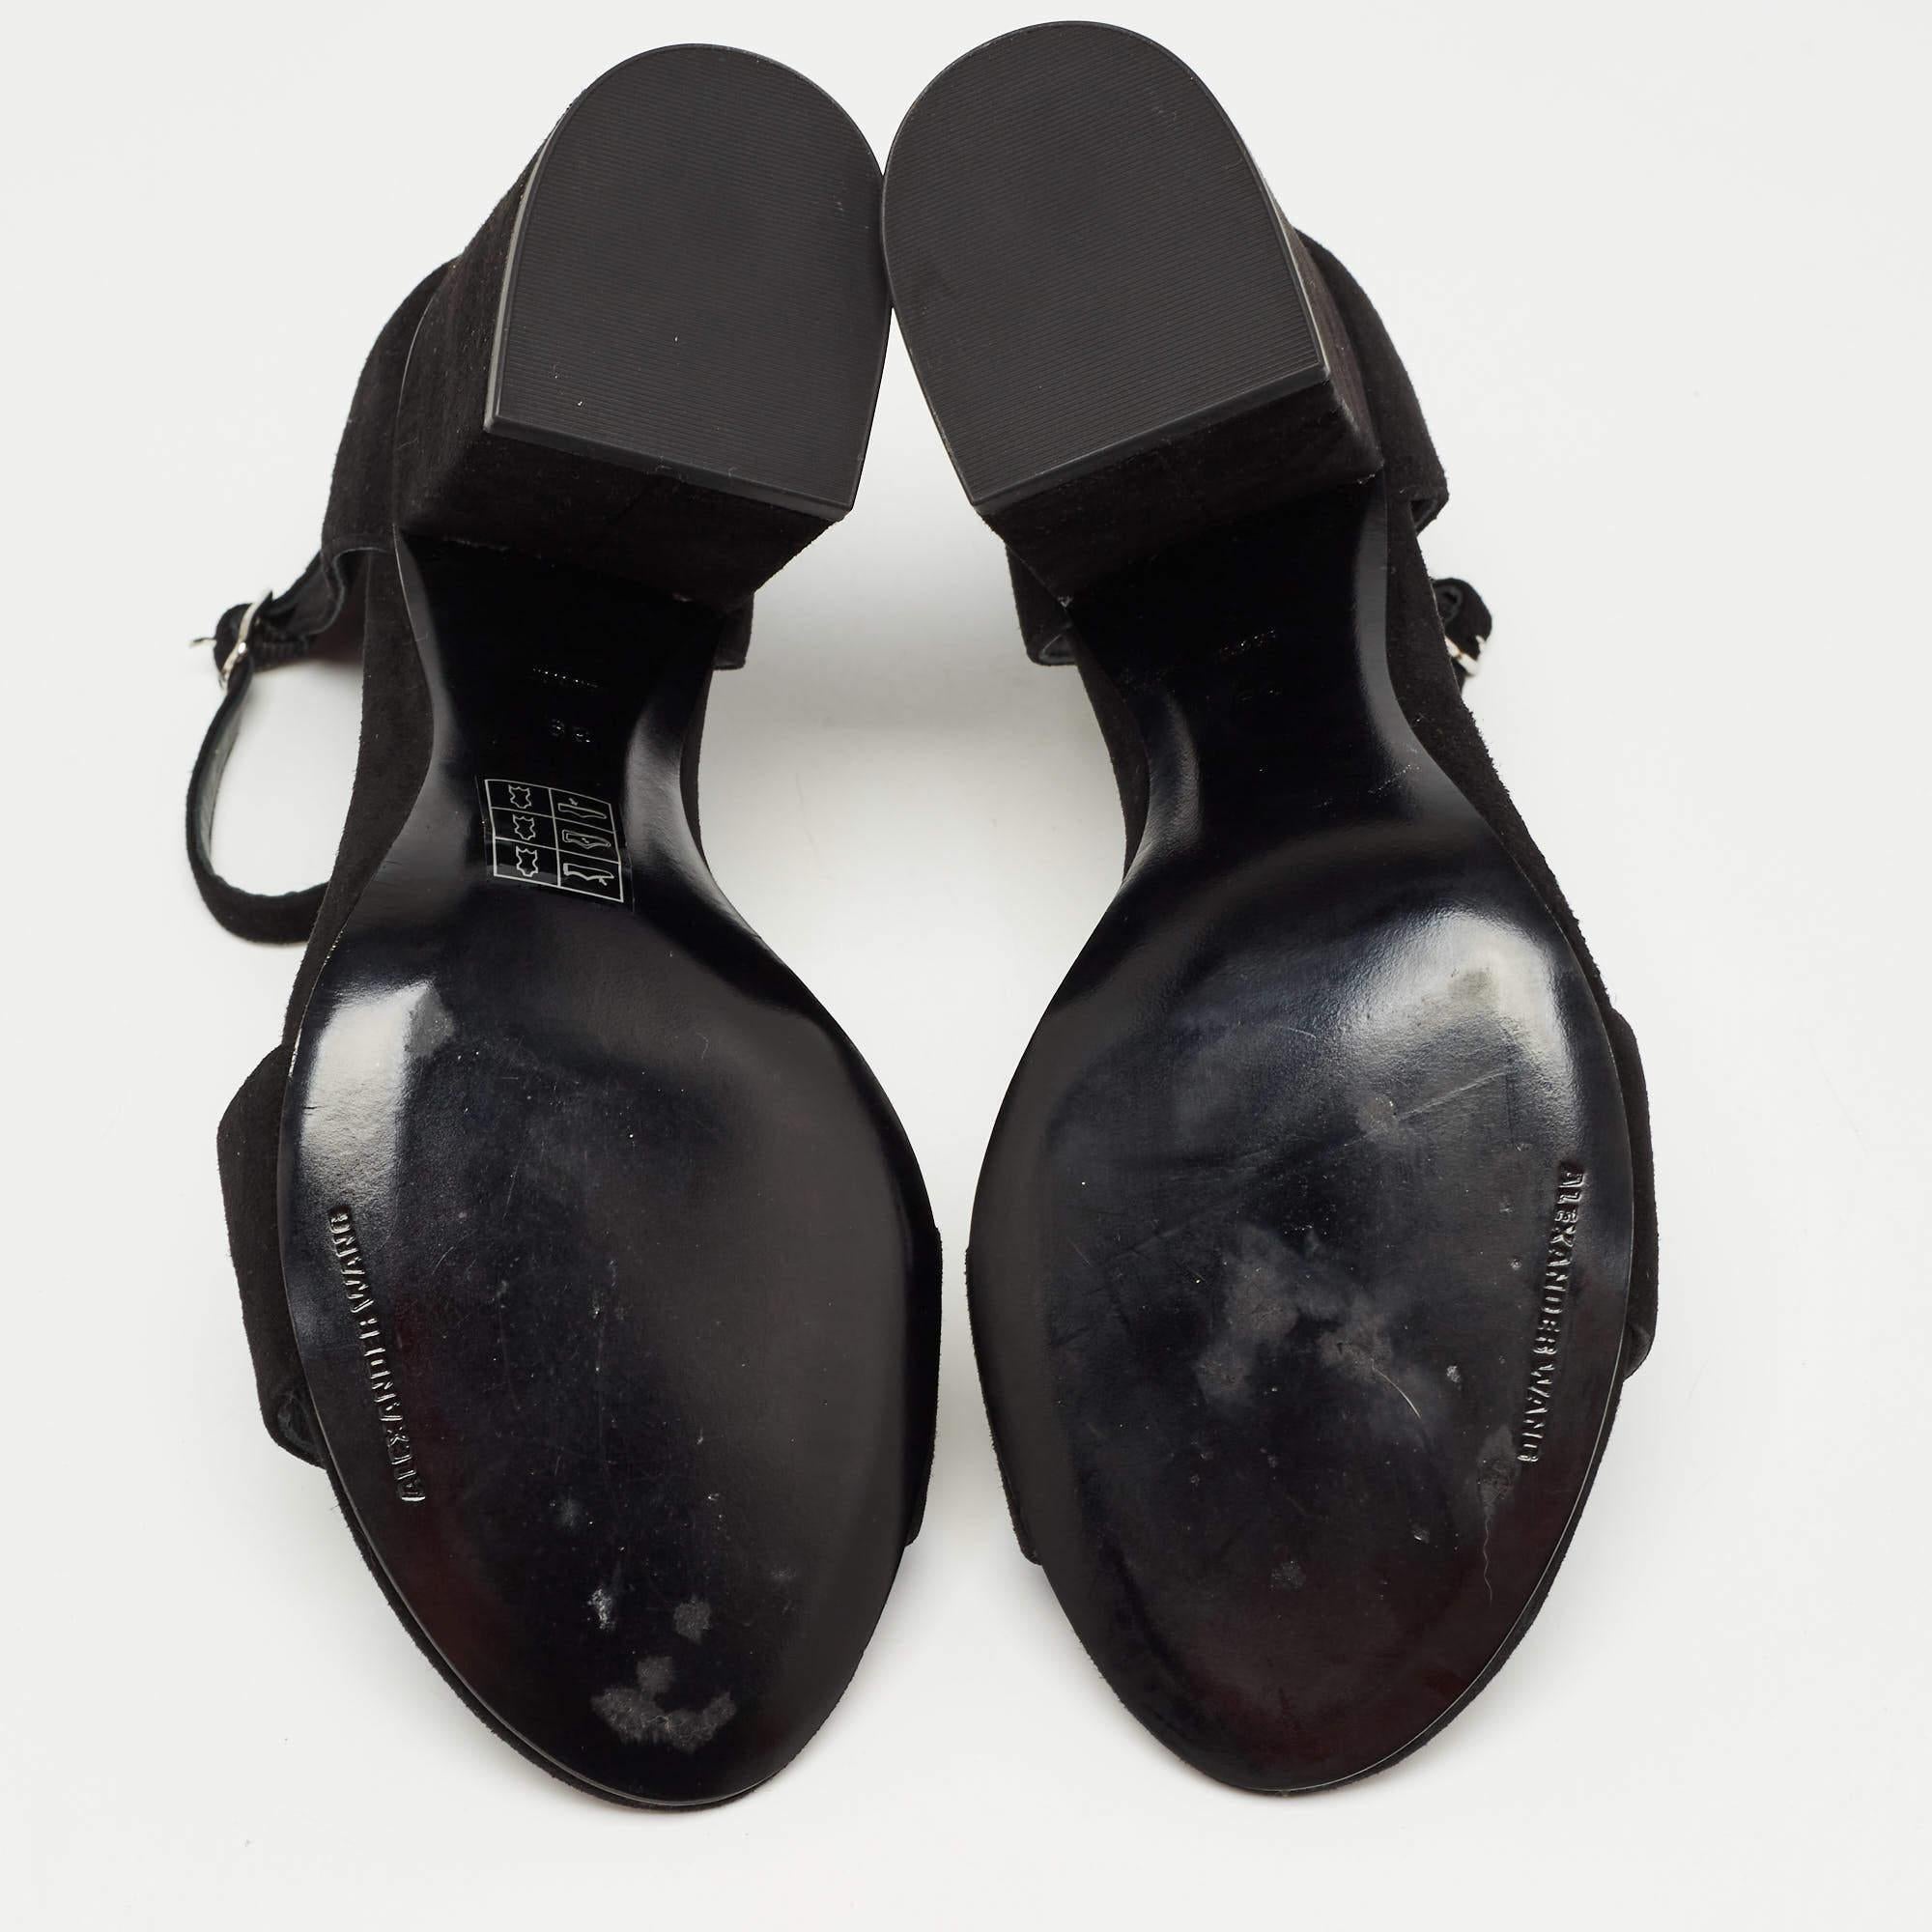 Alexander Wang Black Suede Abby Sandals Size 39 For Sale 1